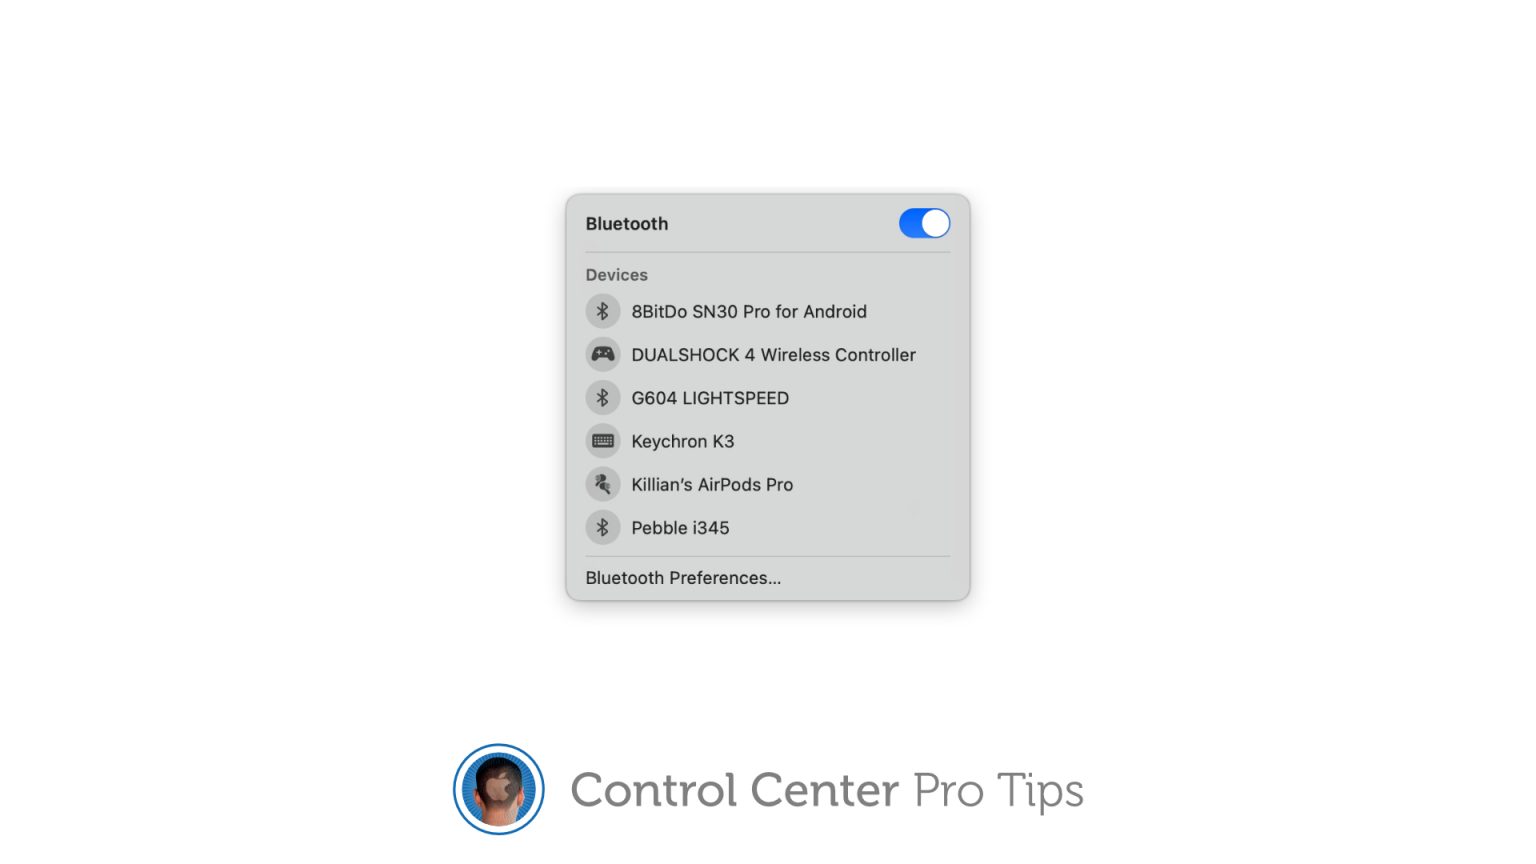 Manage Bluetooth devices in Control Center